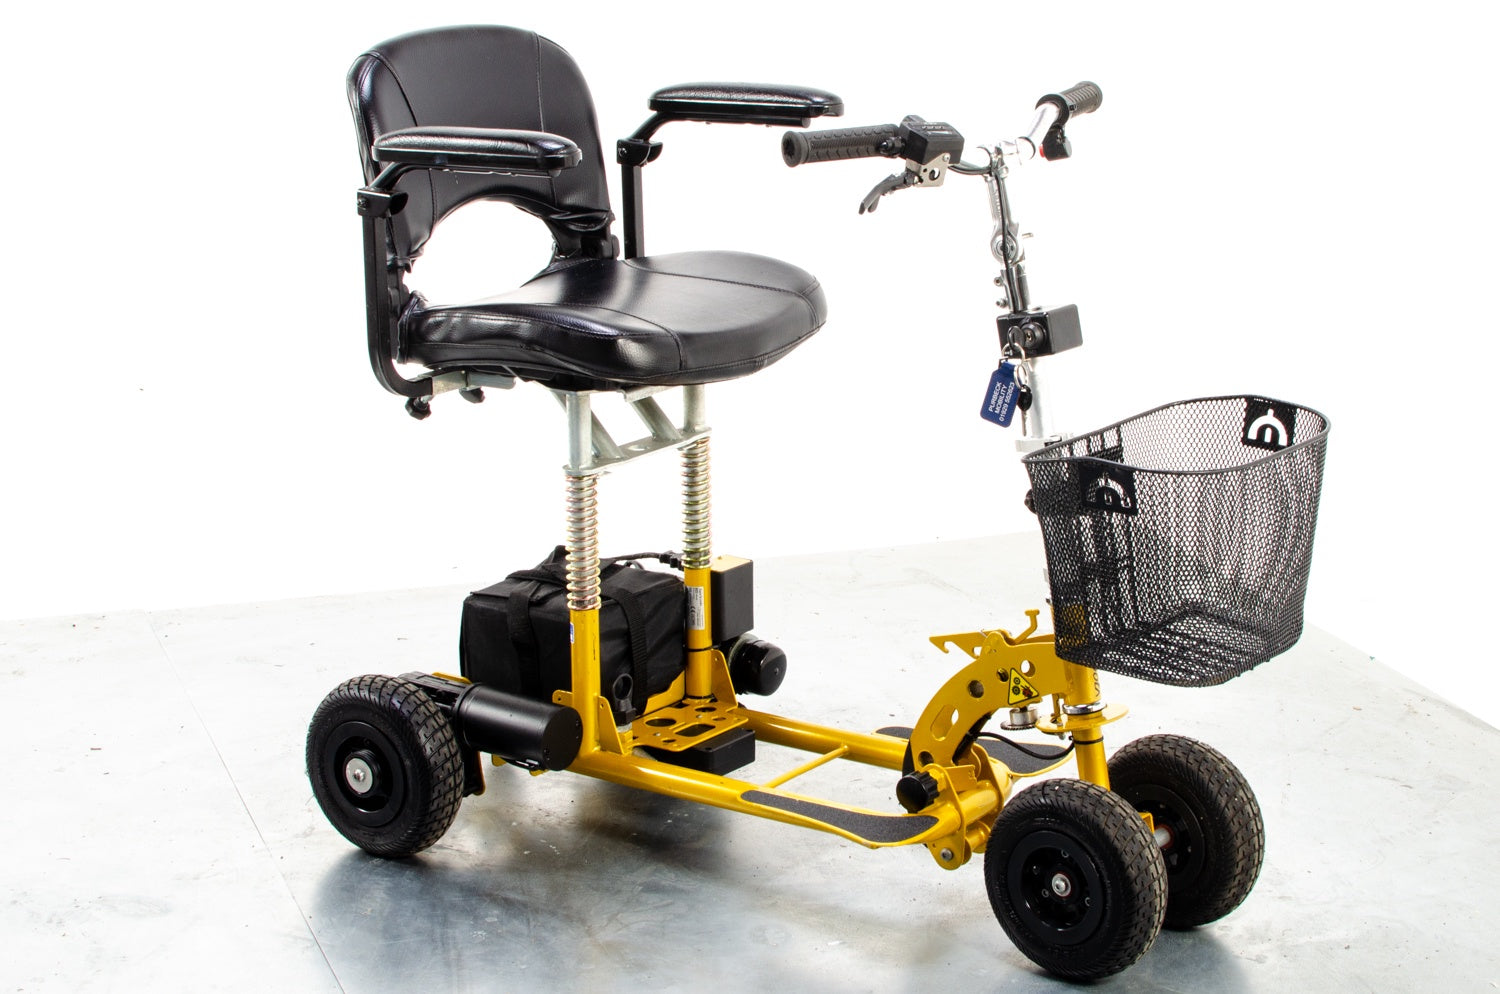 SupaScoota Sprint Used Mobility Scooter Small Transportable Folding Lithium Battery Yellow